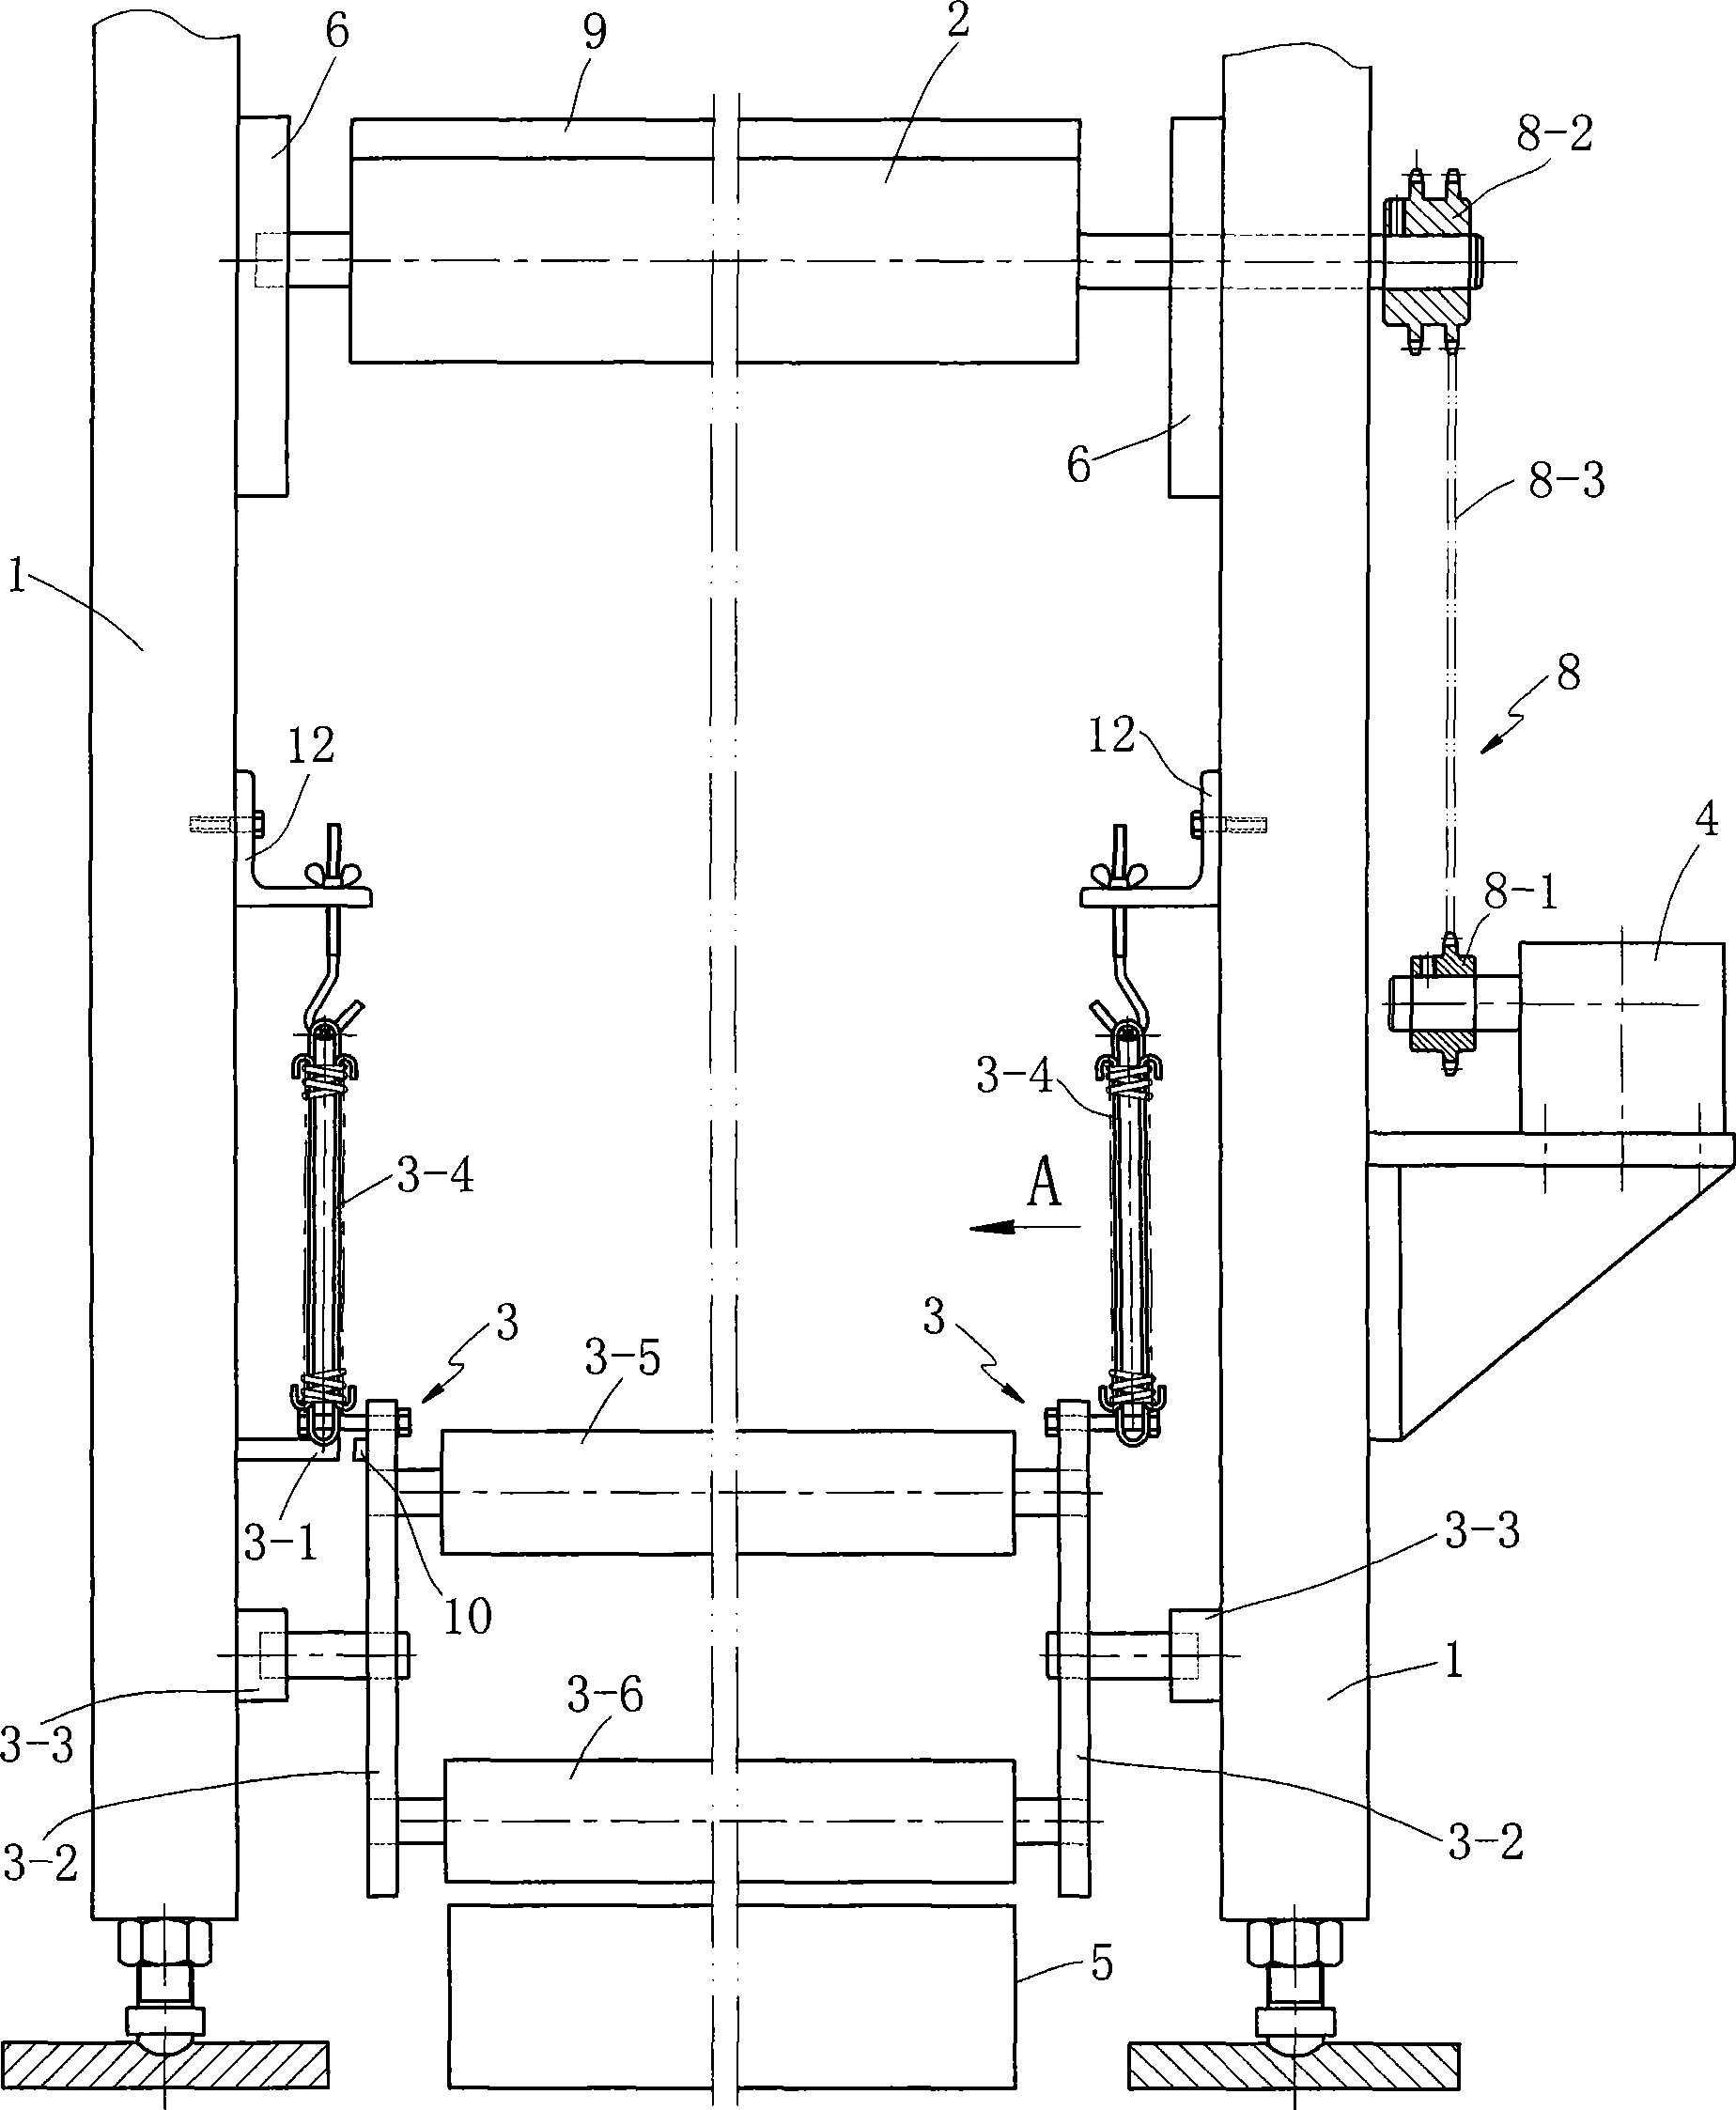 Coiling apparatus for warp knitting machine fabric